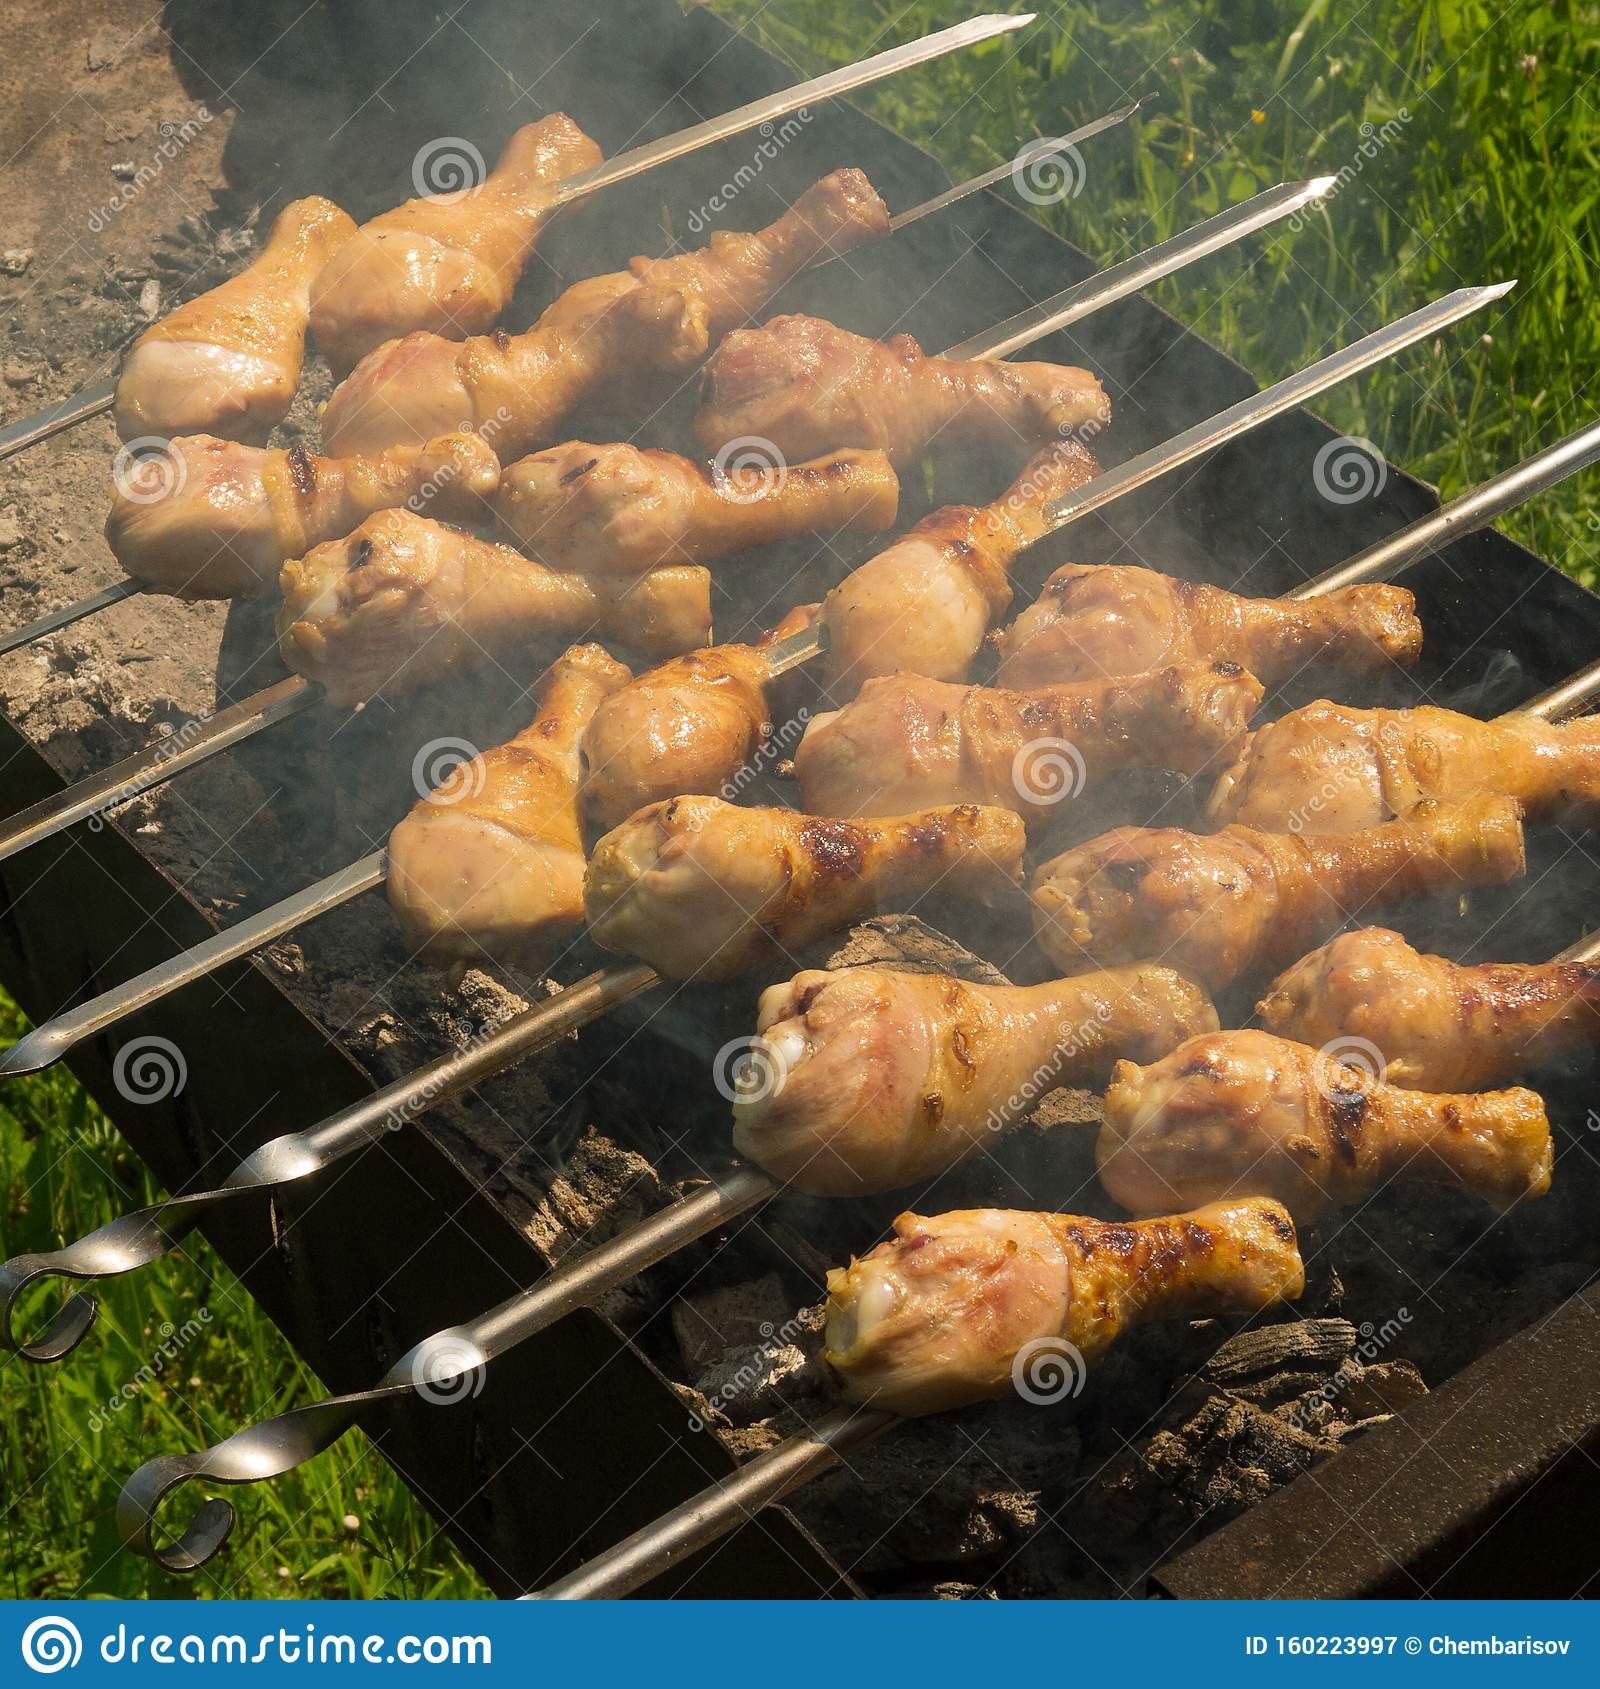 Cooking Fresh Juicy Chicken Legs on the Grill Stock Image